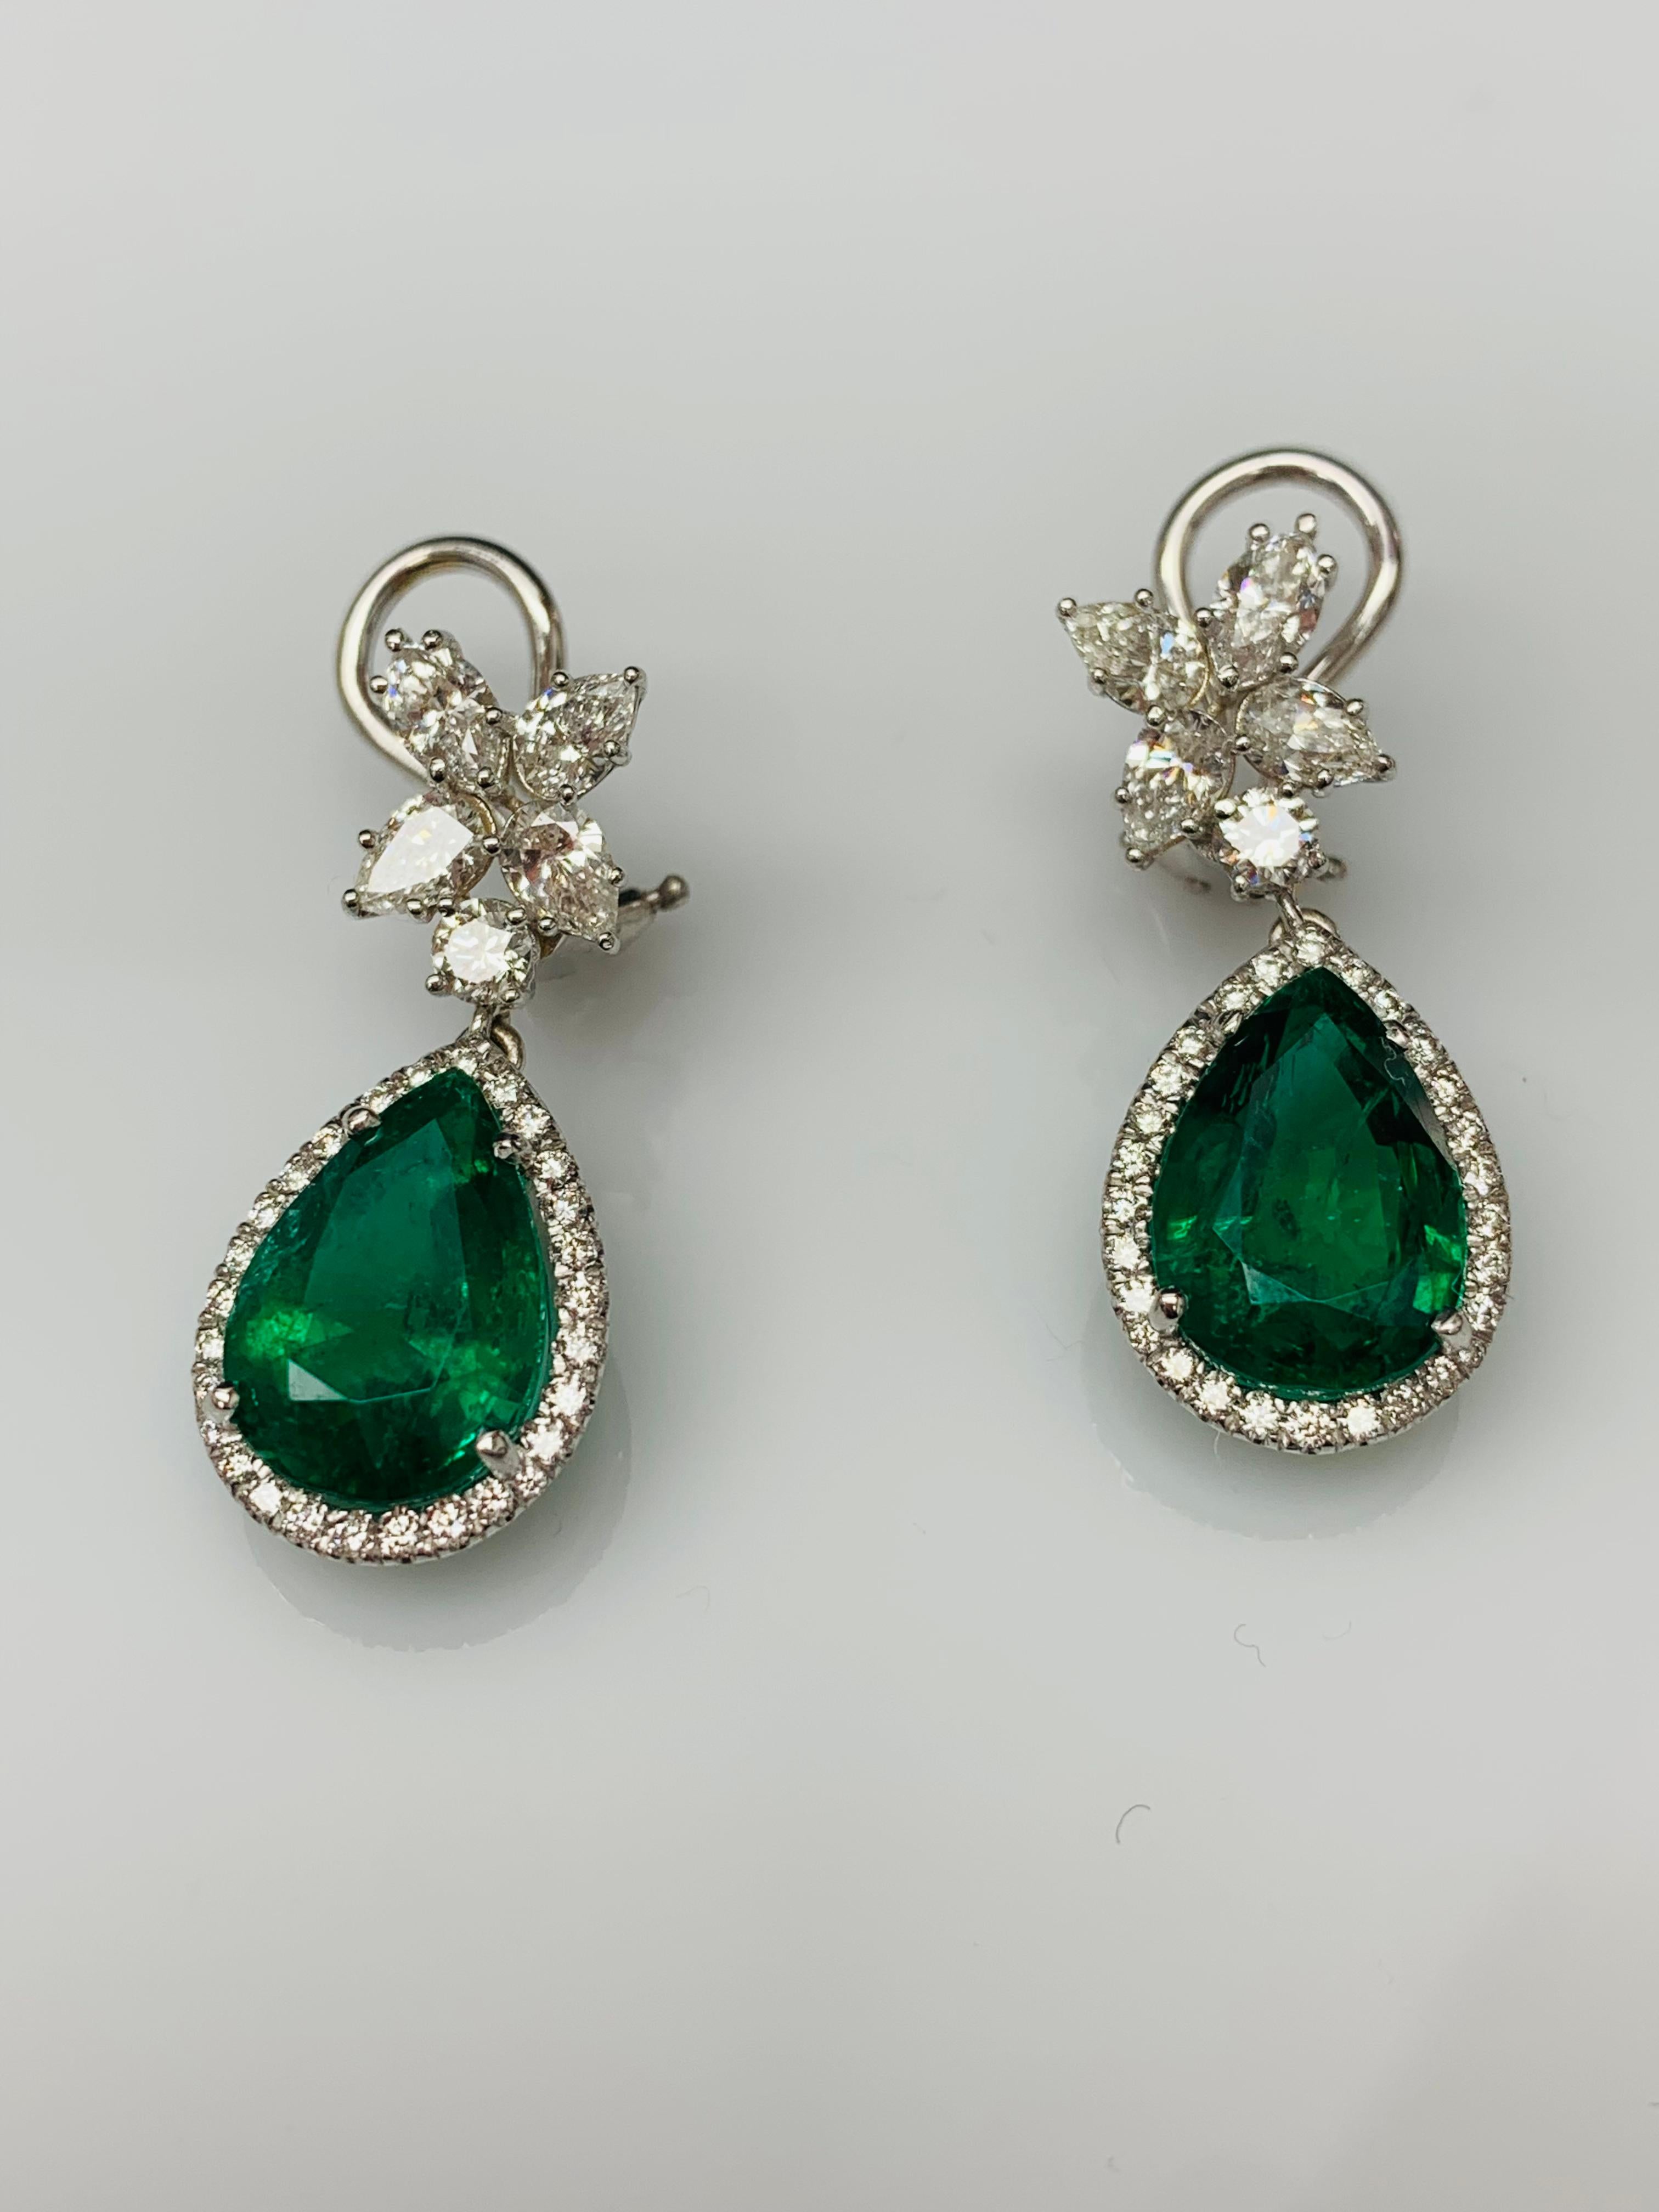 8.92 Carat of Pear Shape Emerald and Diamond Drop Earrings in 18K White Gold For Sale 8